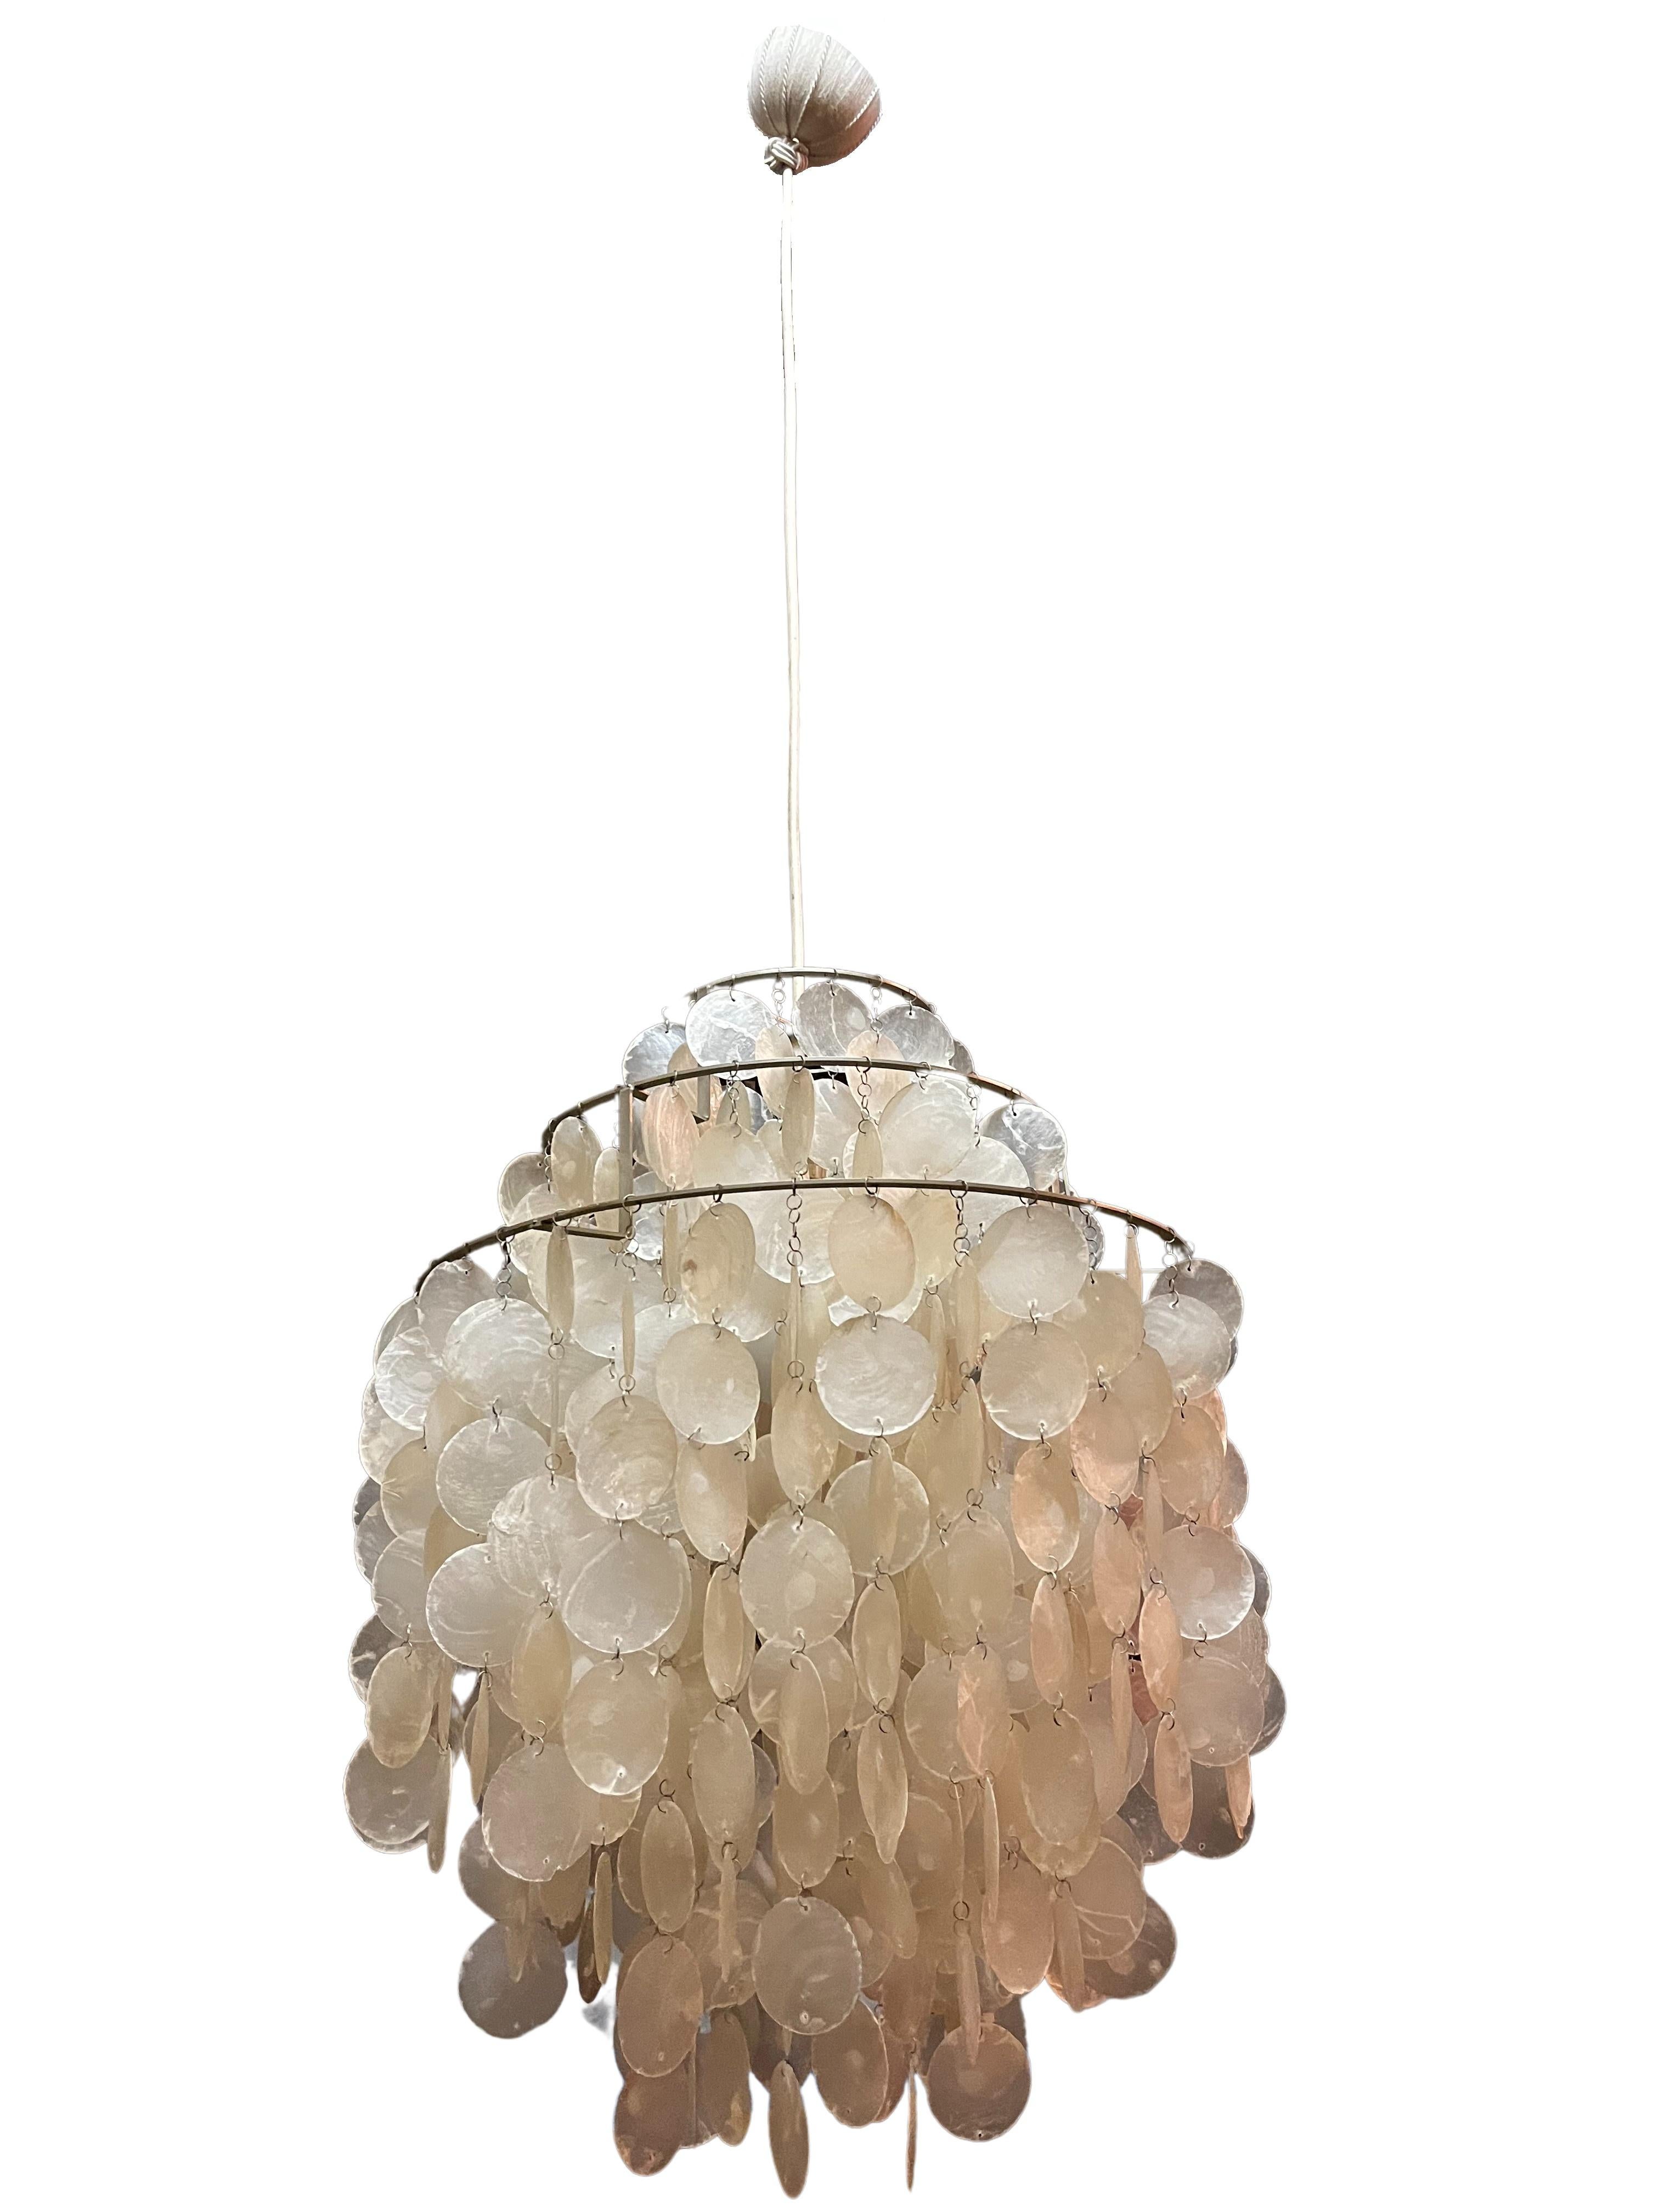 Fantastic hanging lamp, Fun 0DM, a rare original from the 1960s, by the famous designer Verner Panton from Denmark.

The 3 metal rings are covered all over with round shell plates that are attached with small metal rings. This creates a wonderful